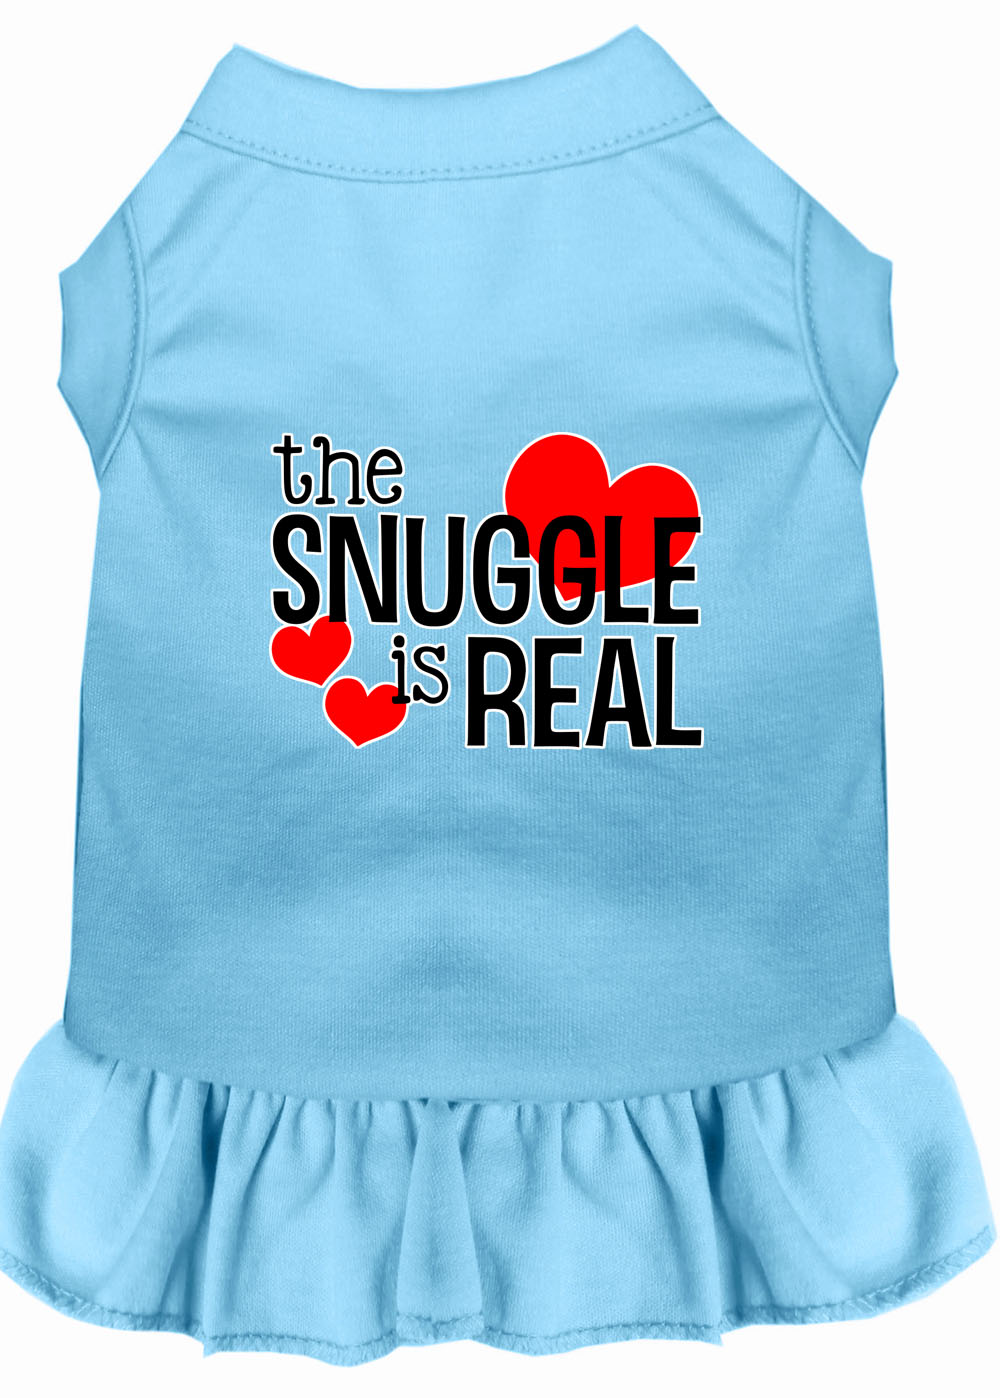 The Snuggle is Real Screen Print Dog Dress Baby Blue XXXL